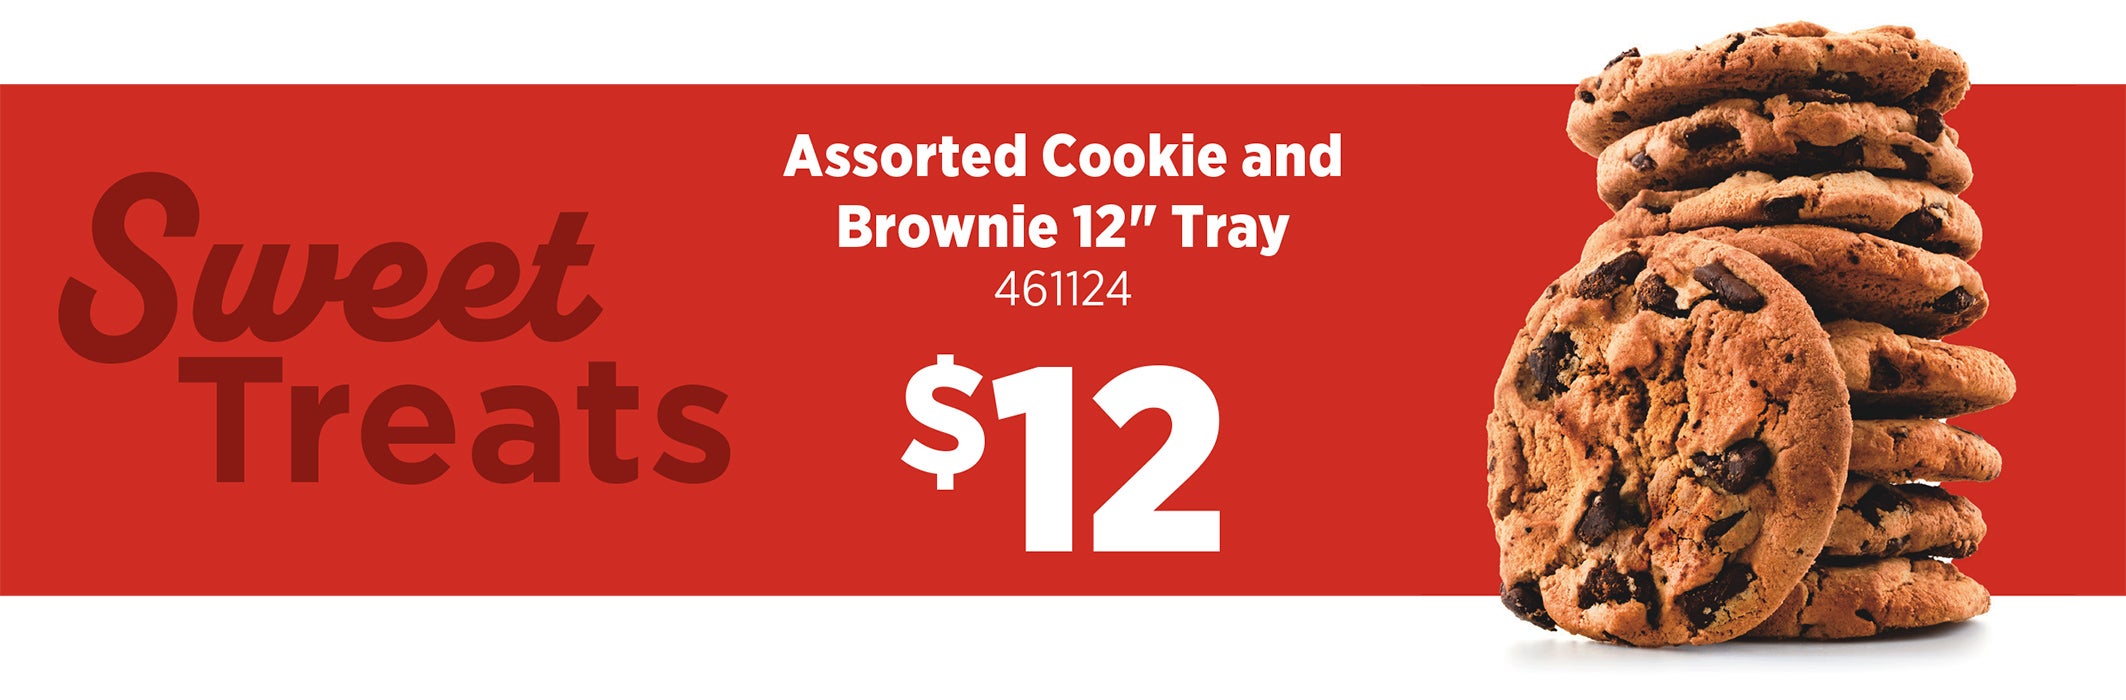 Cookie and Brownie Tray $12